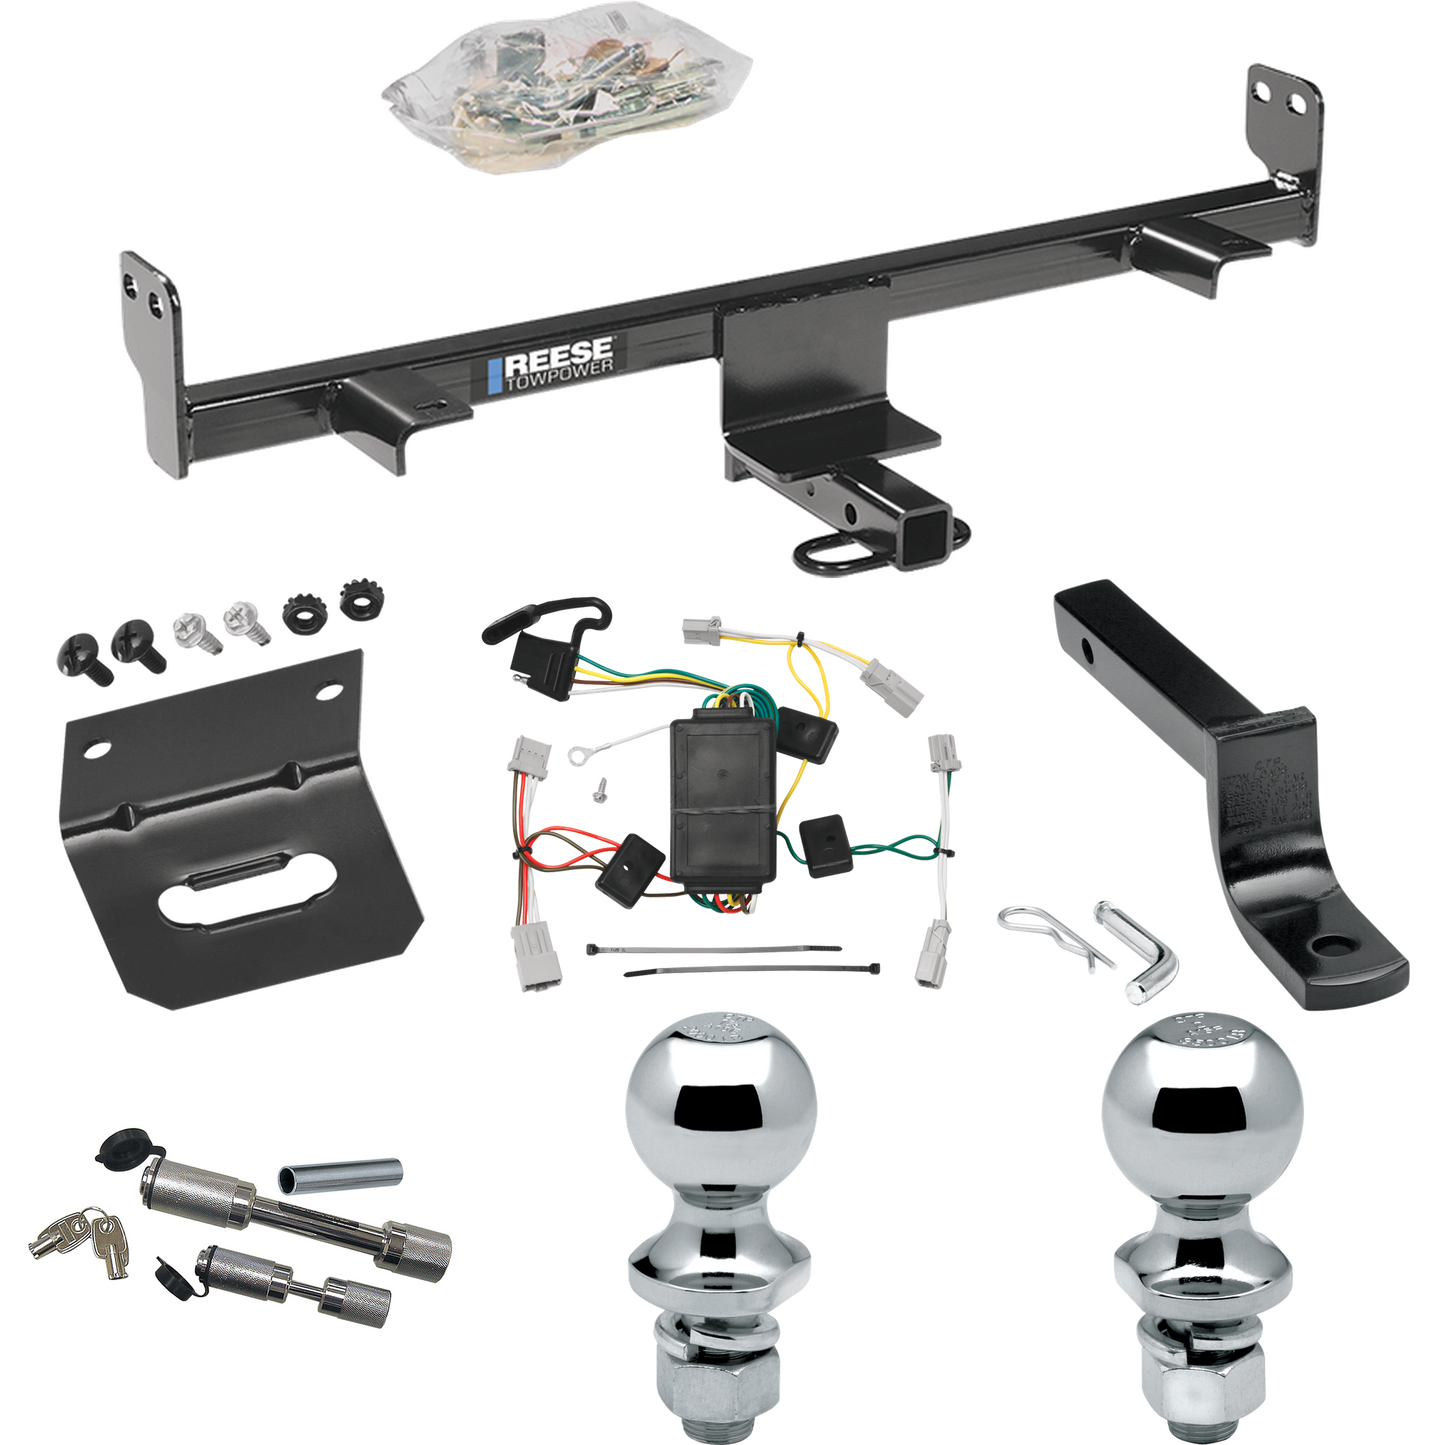 Fits 2004-2009 Mazda 3 Trailer Hitch Tow PKG w/ 4-Flat Wiring Harness + Draw-Bar + 1-7/8" + 2" Ball + Wiring Bracket + Dual Hitch & Coupler Locks (For Hatchback, Except w/Grand Touring LED Taillights Models) By Reese Towpower